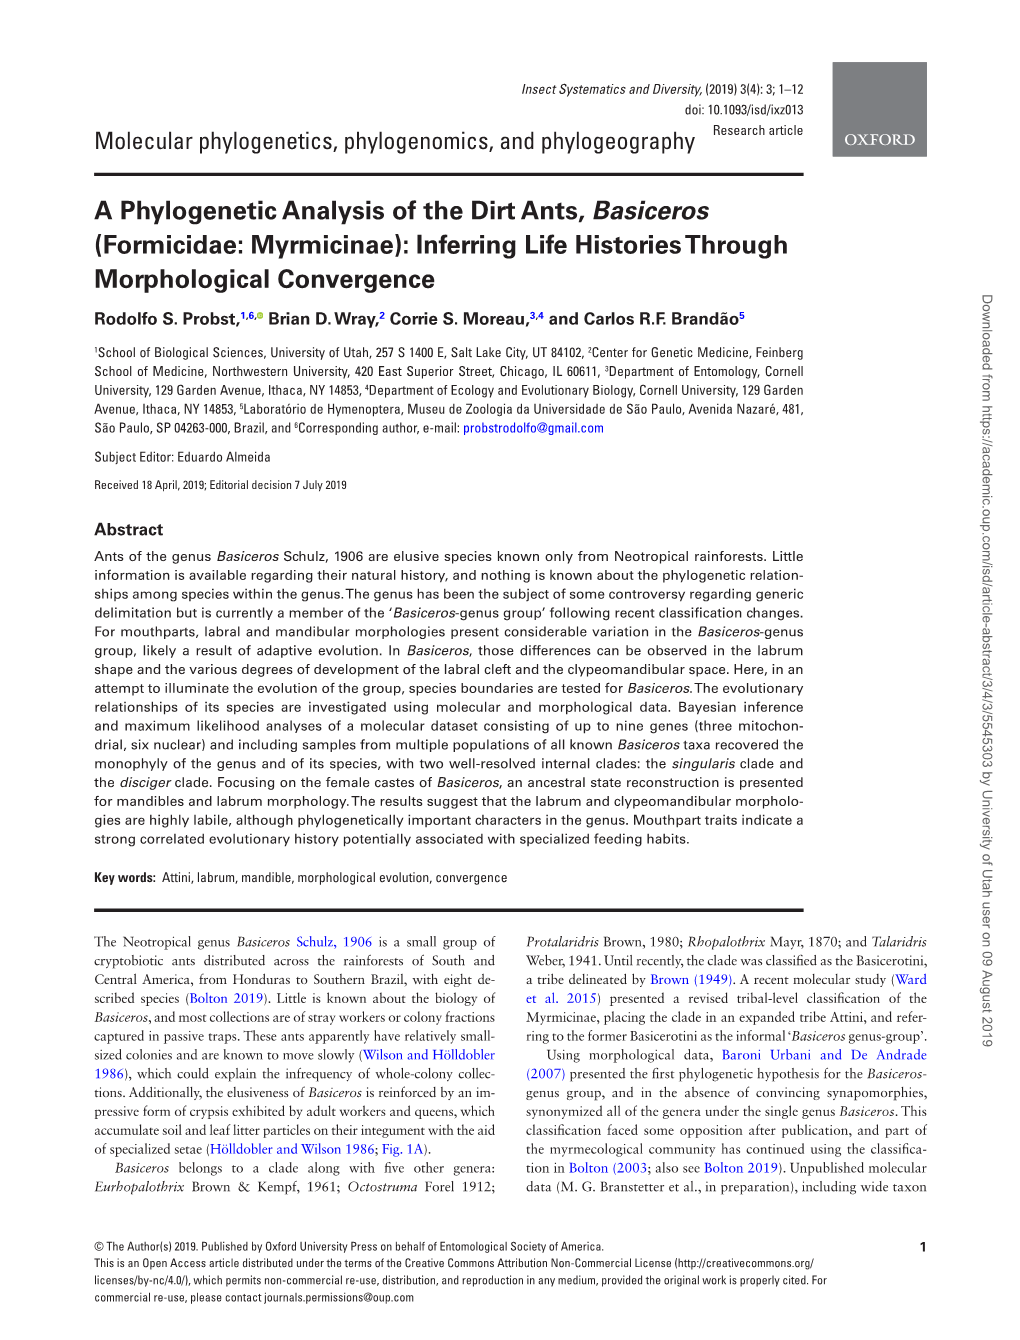 A Phylogenetic Analysis of the Dirt Ants, Basiceros (Formicidae